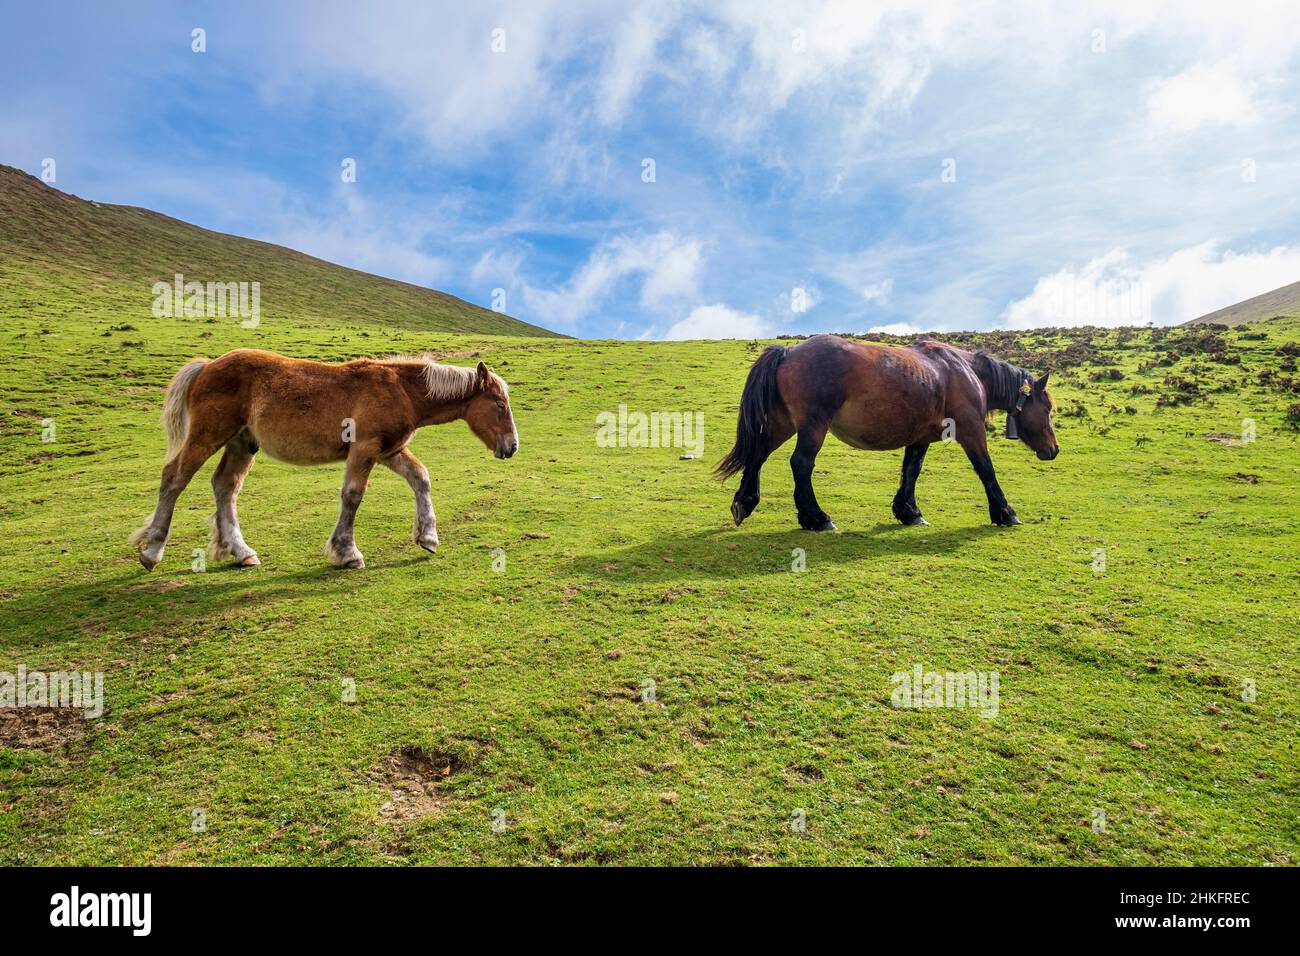 Spain, Navarre, horses on the Camino Francés, Spanish route of the pilgrimage to Santiago de Compostela, listed as a UNESCO World Heritage Site, stage between Saint-Jean-Pied-de-Port and Roncesvalles Stock Photo